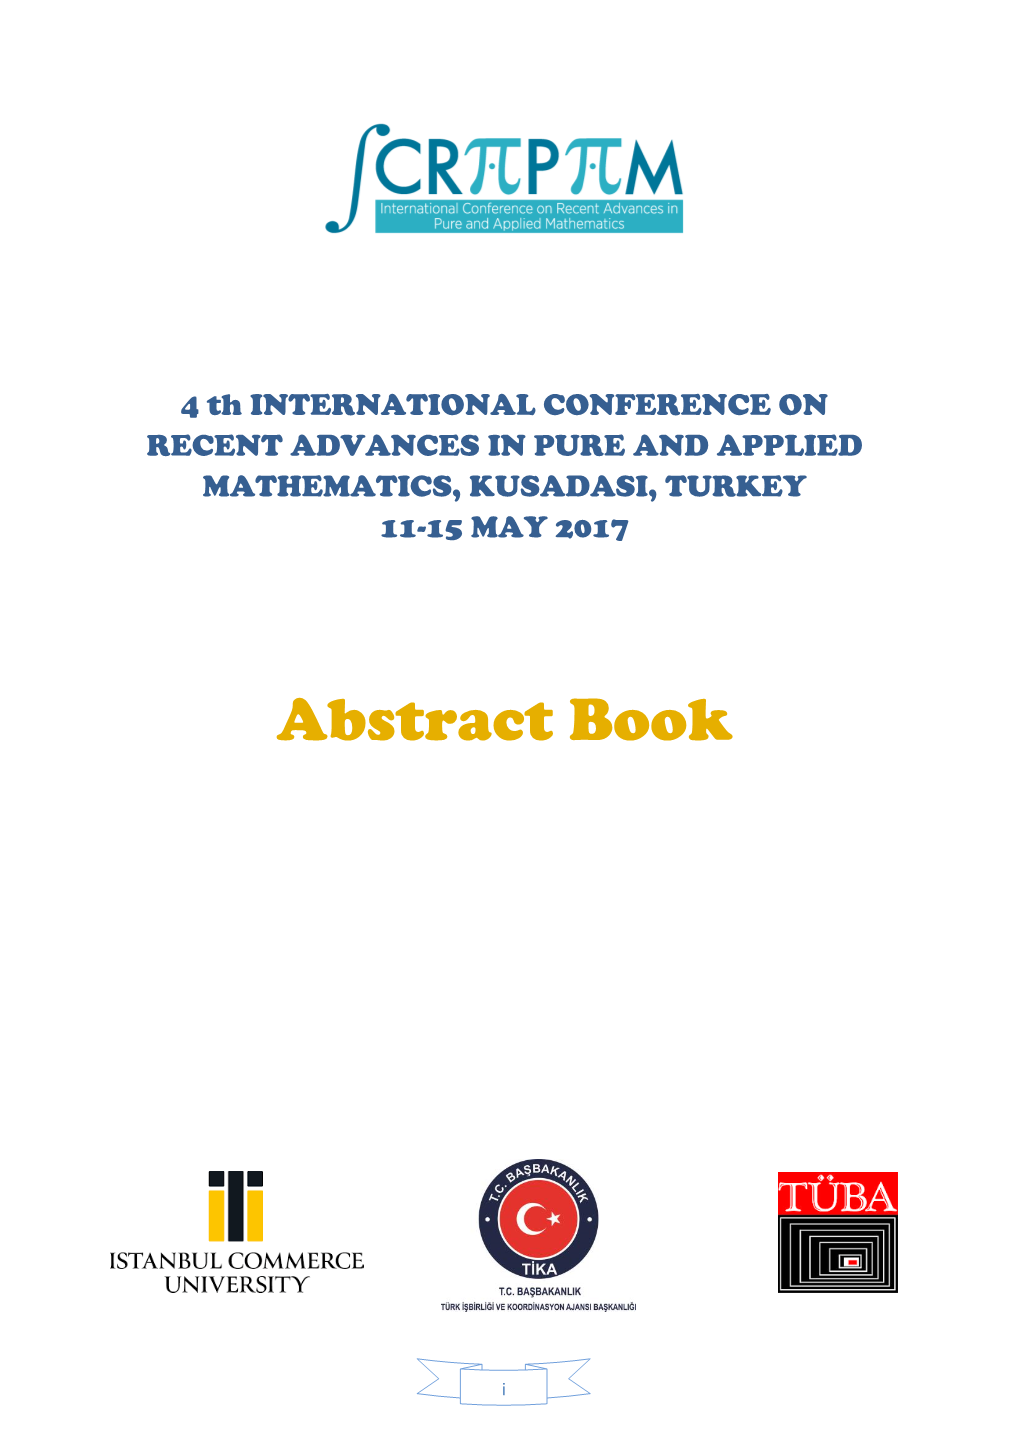 Conference Abstract Book